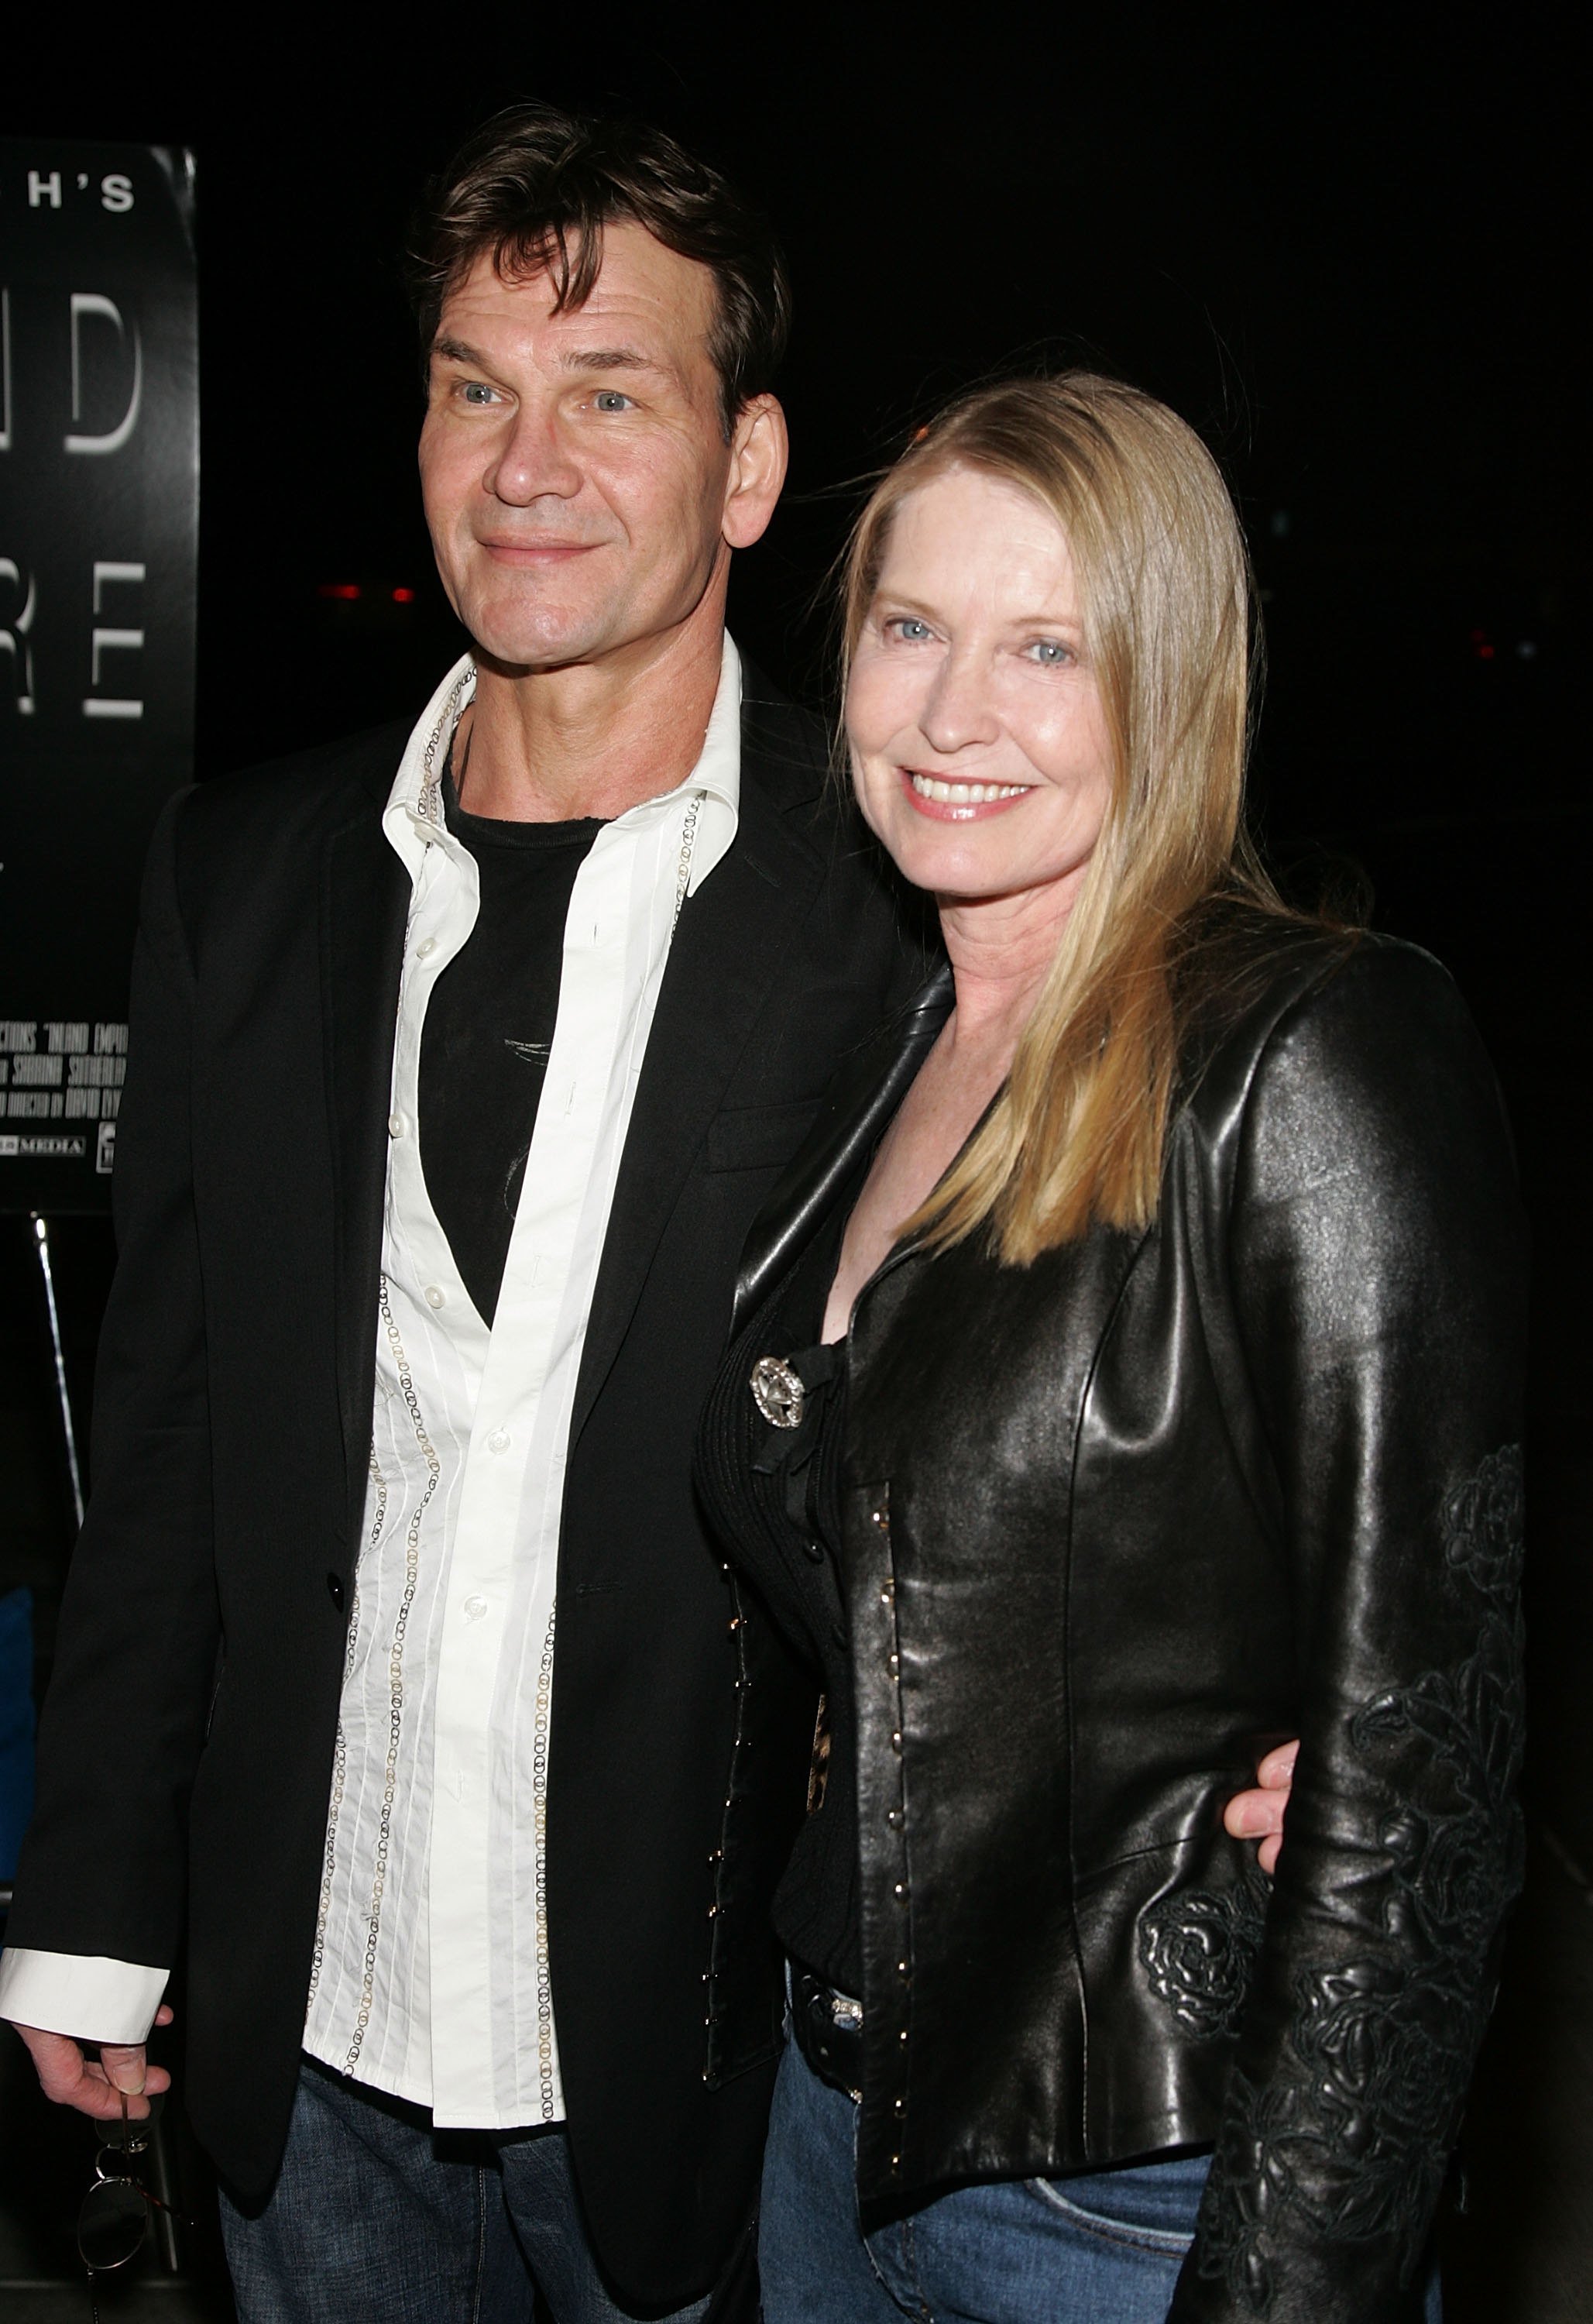 Patrick Swayze and Lisa Niemi in Los Angeles 2006 | Source: Getty Images